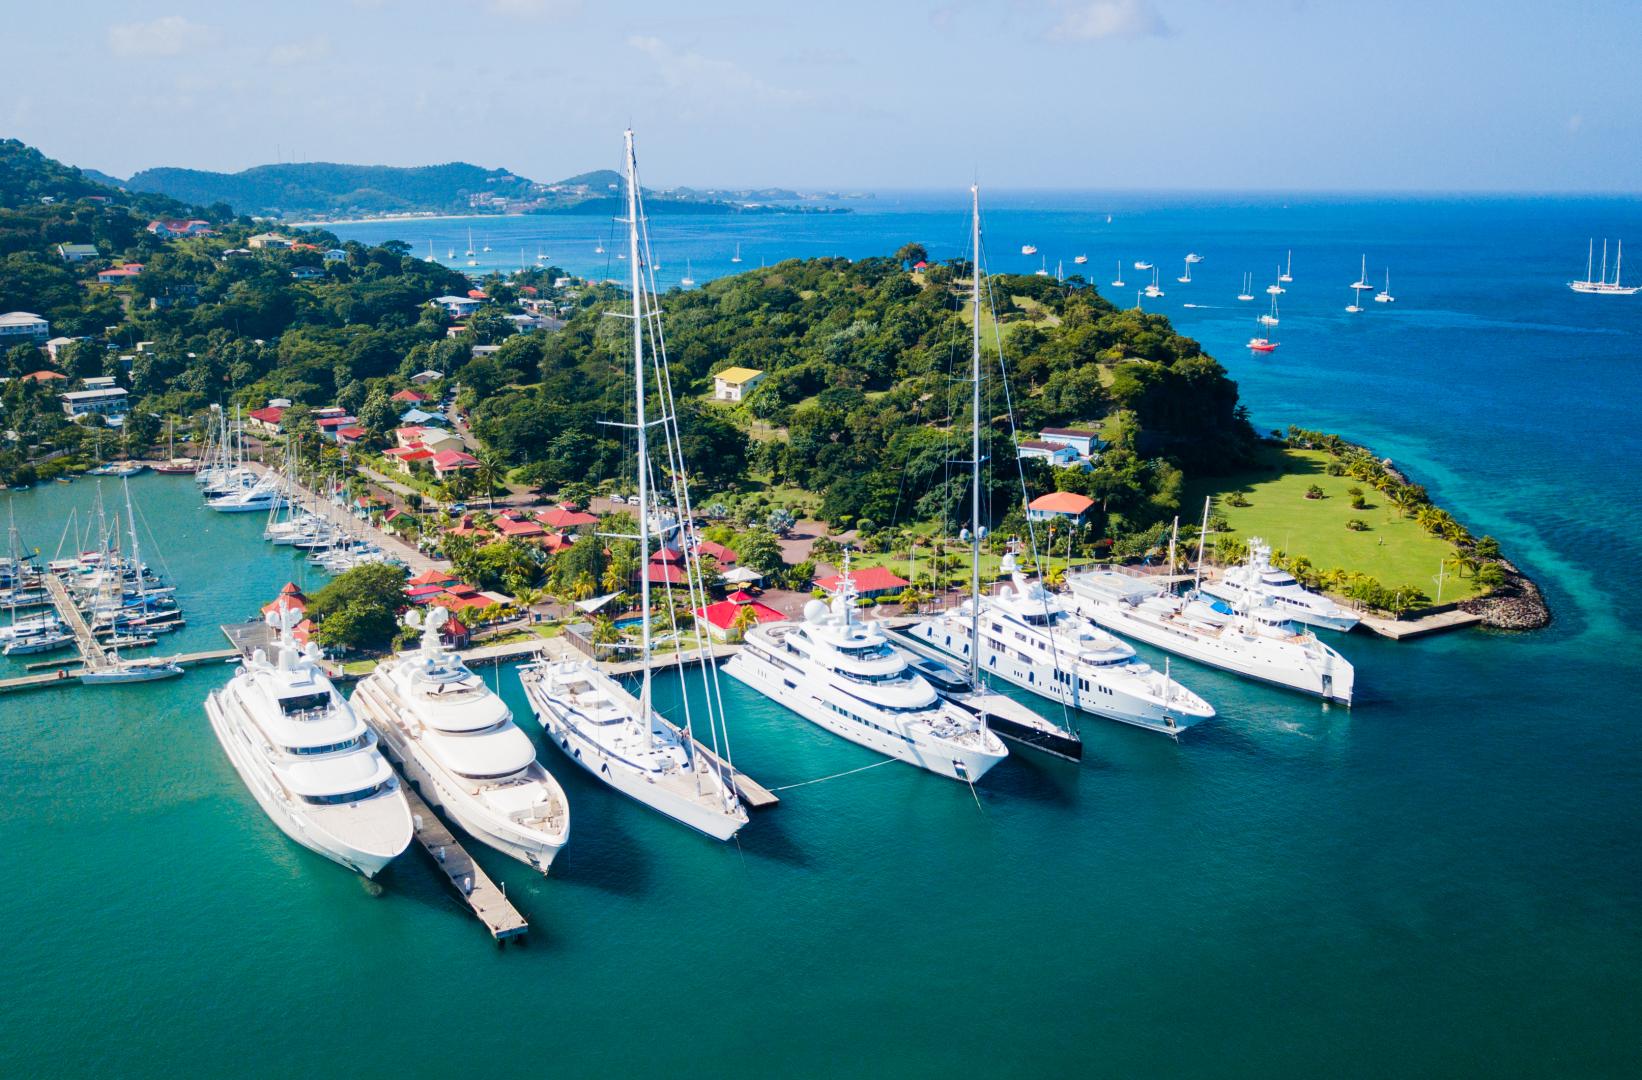 There are six other marinas and three boatyards on Grenada, and two more on the outlying island of Carriaco